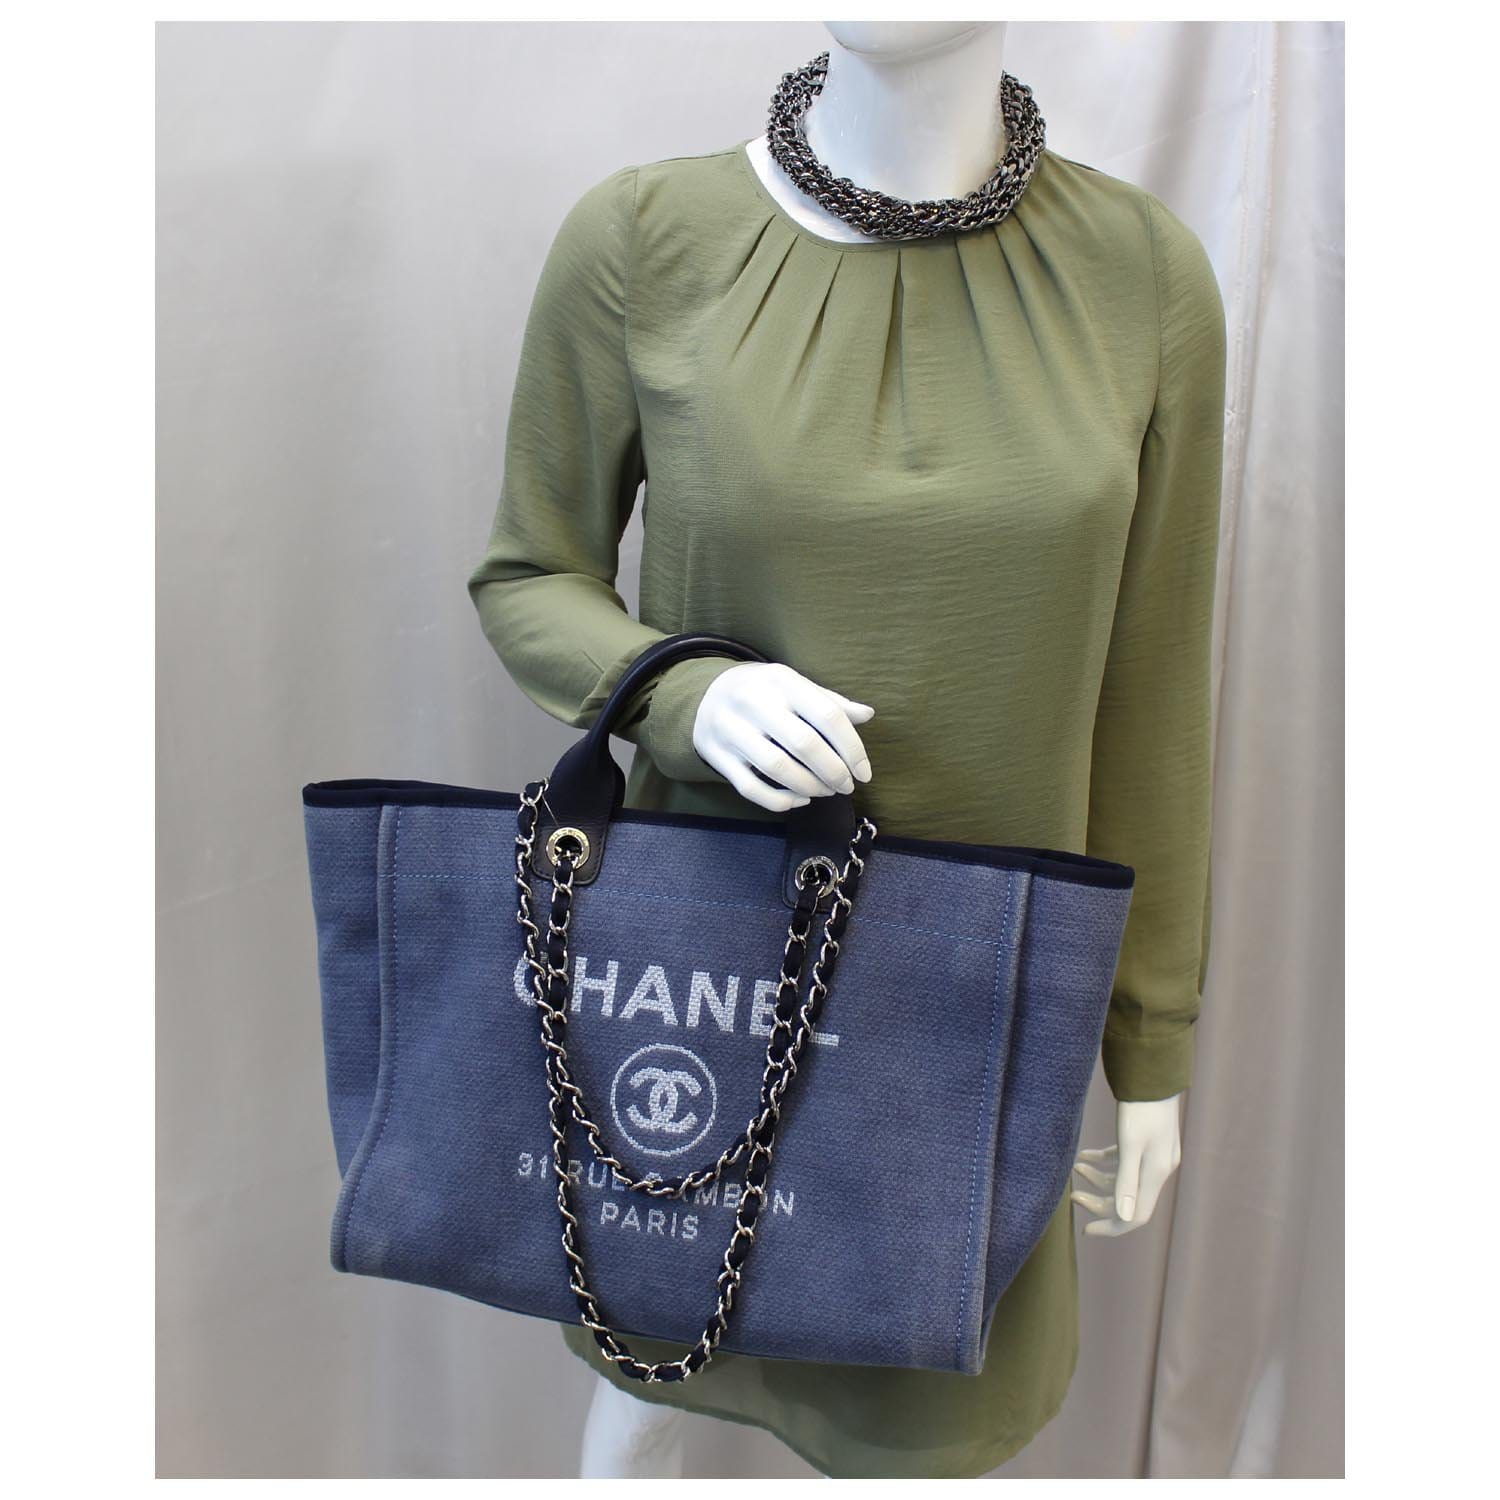 Authentic Chanel Large Deauville Canvas Tote Bag